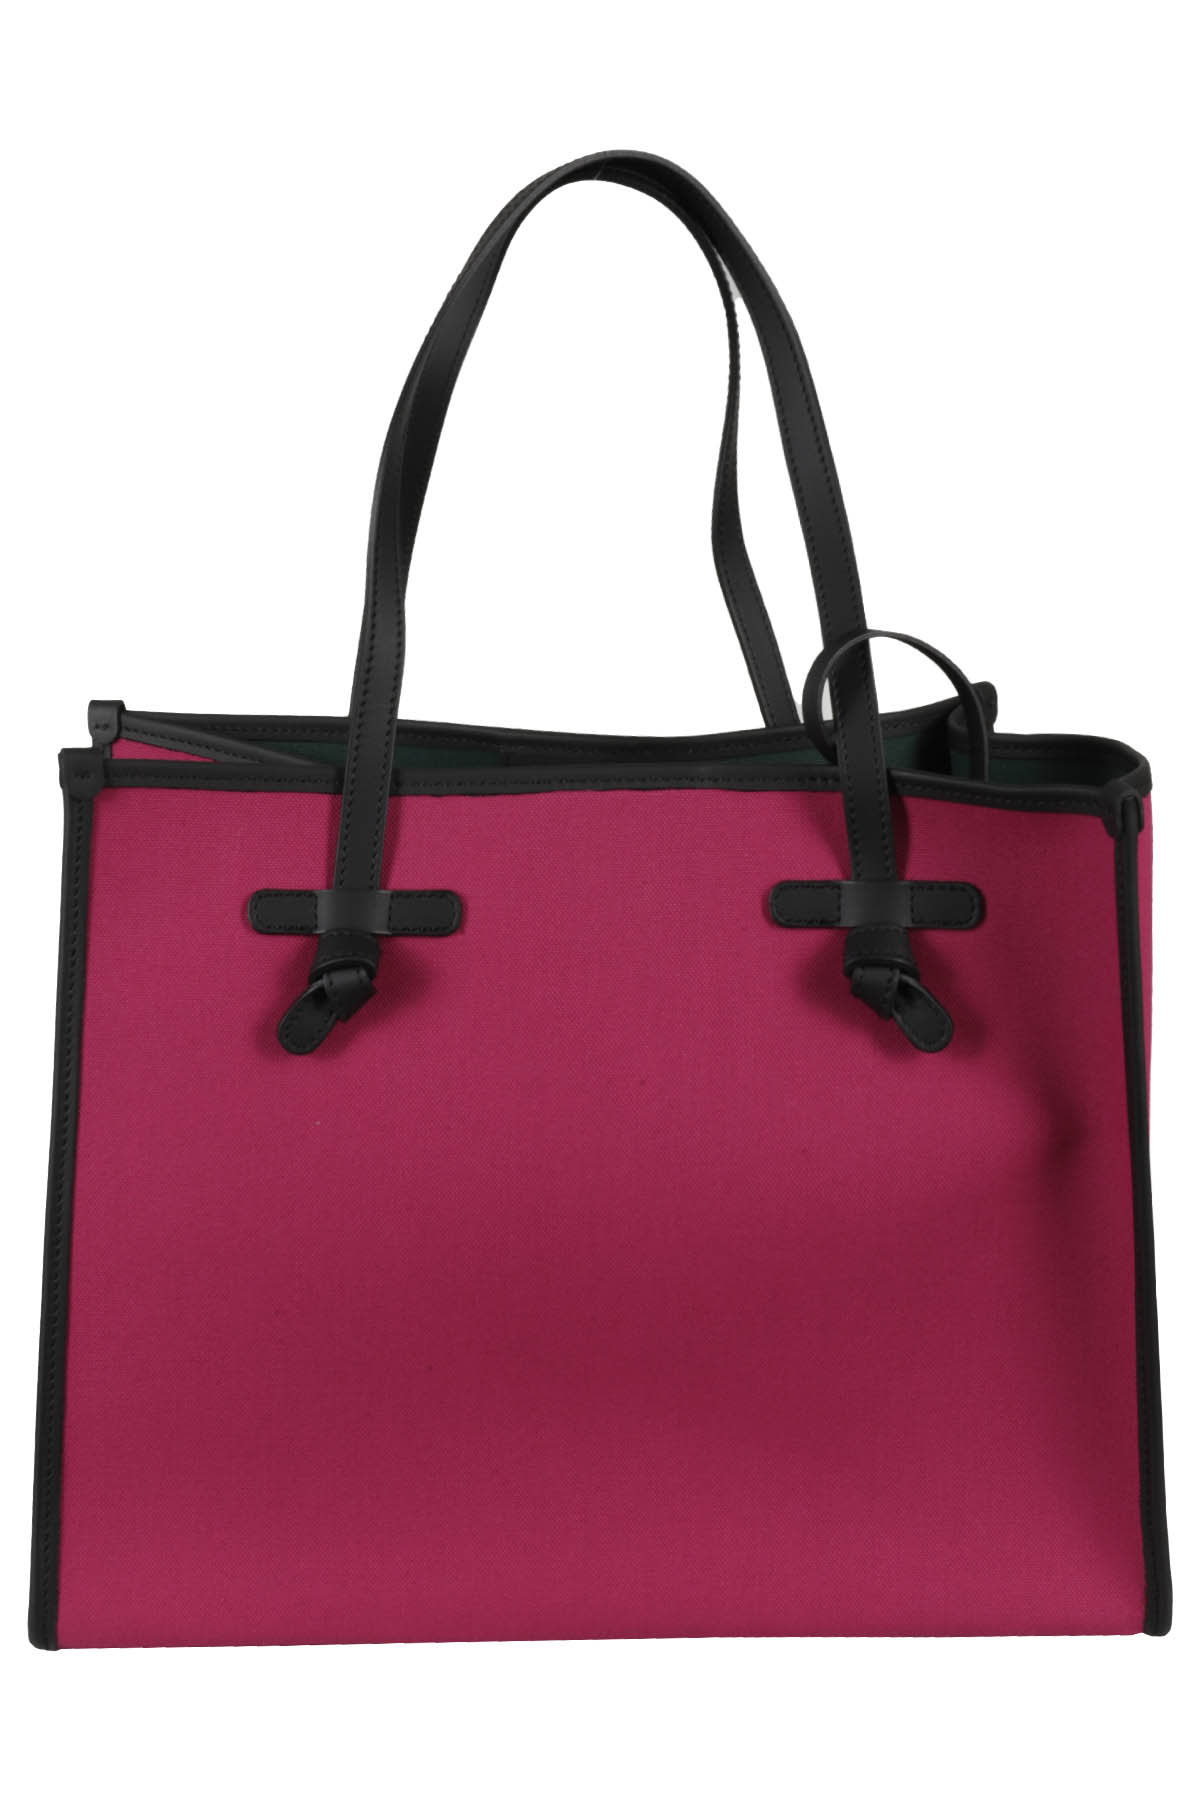 Gianni Chiarini Marcella In Hot Pink Forest